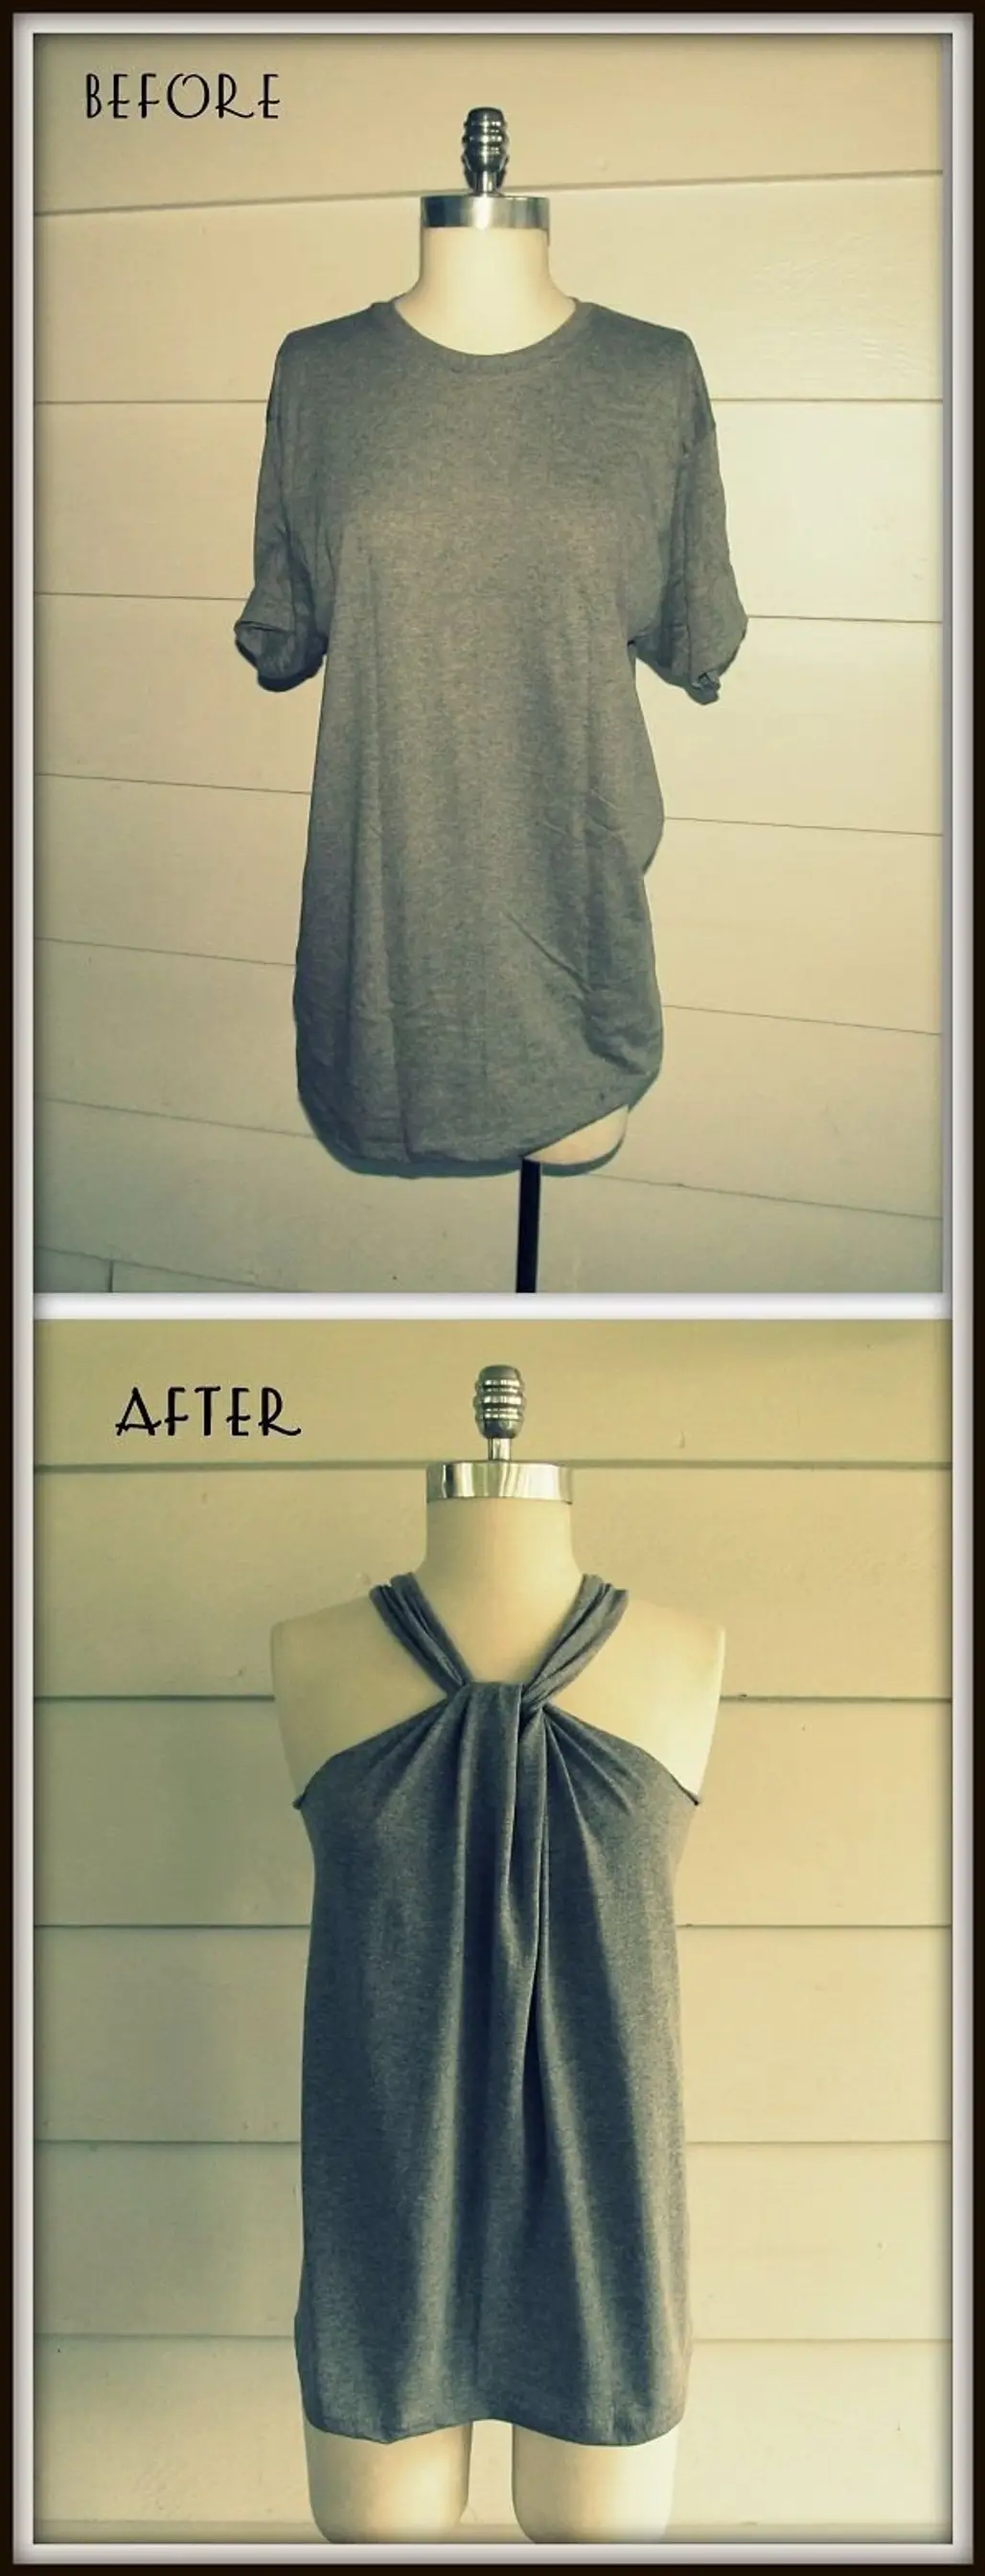 Make Your Own Halter Top!